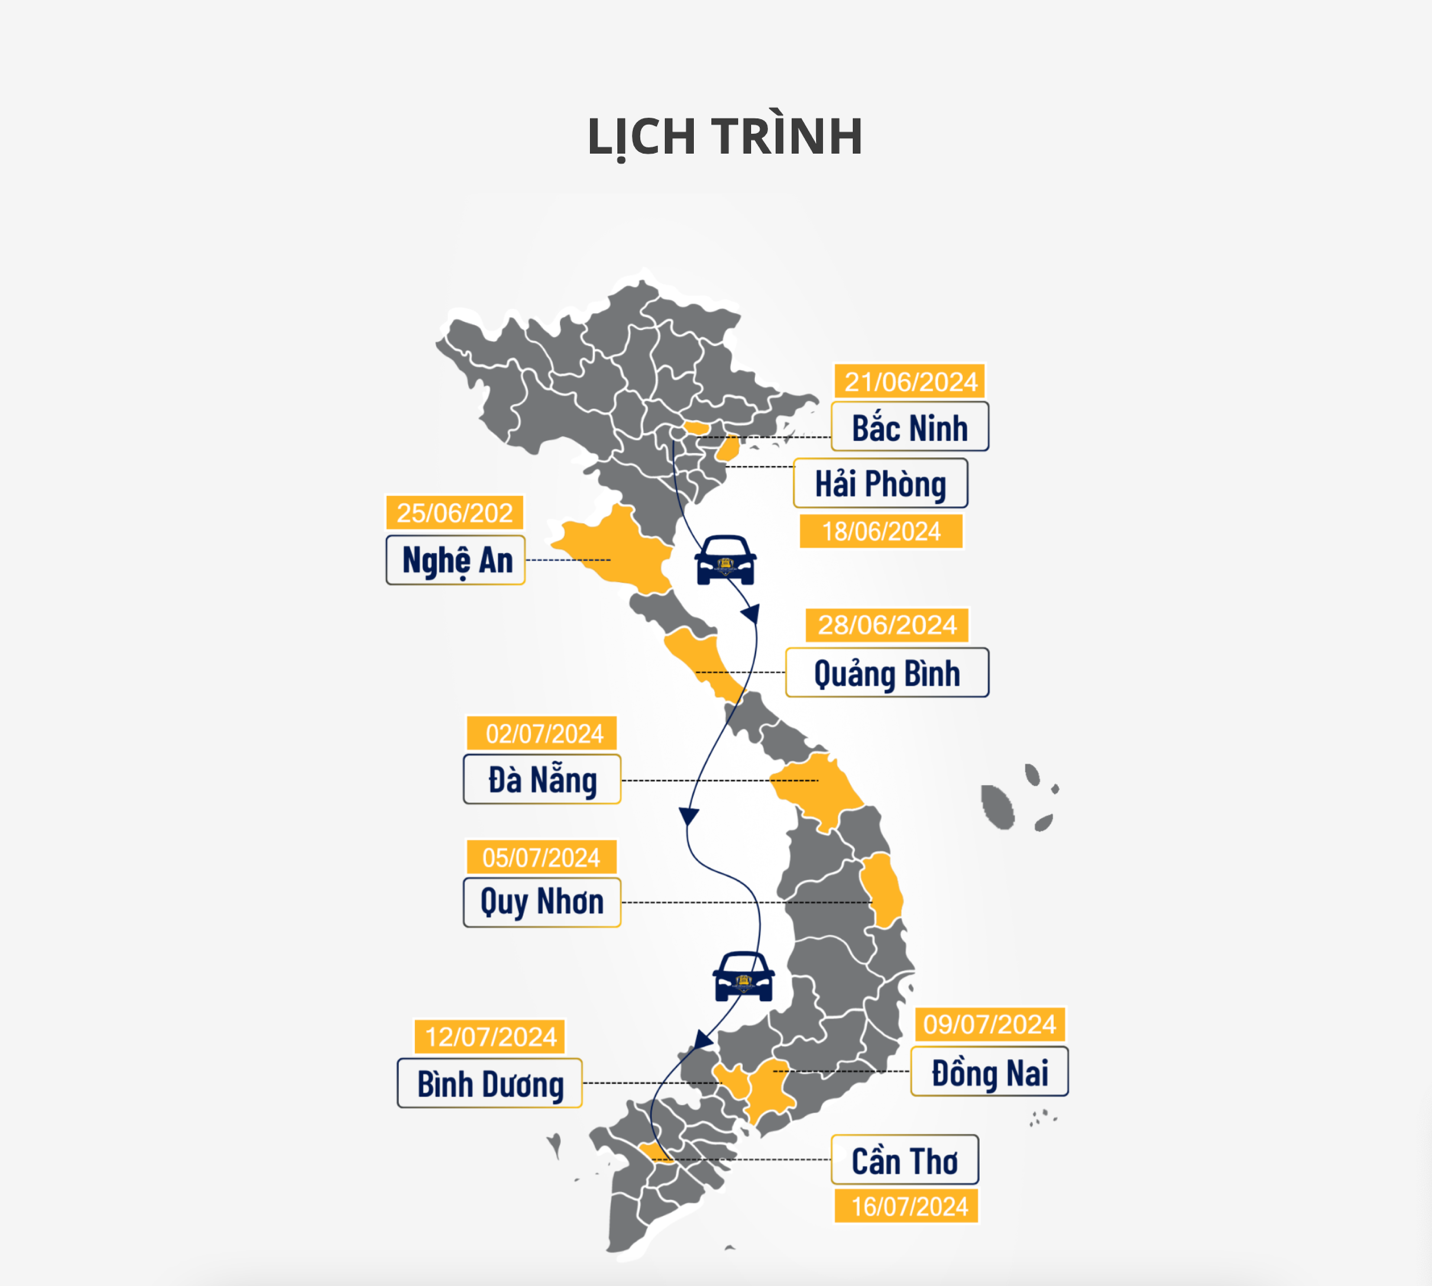 A map of vietnam with orange and grey colors

Description automatically generated